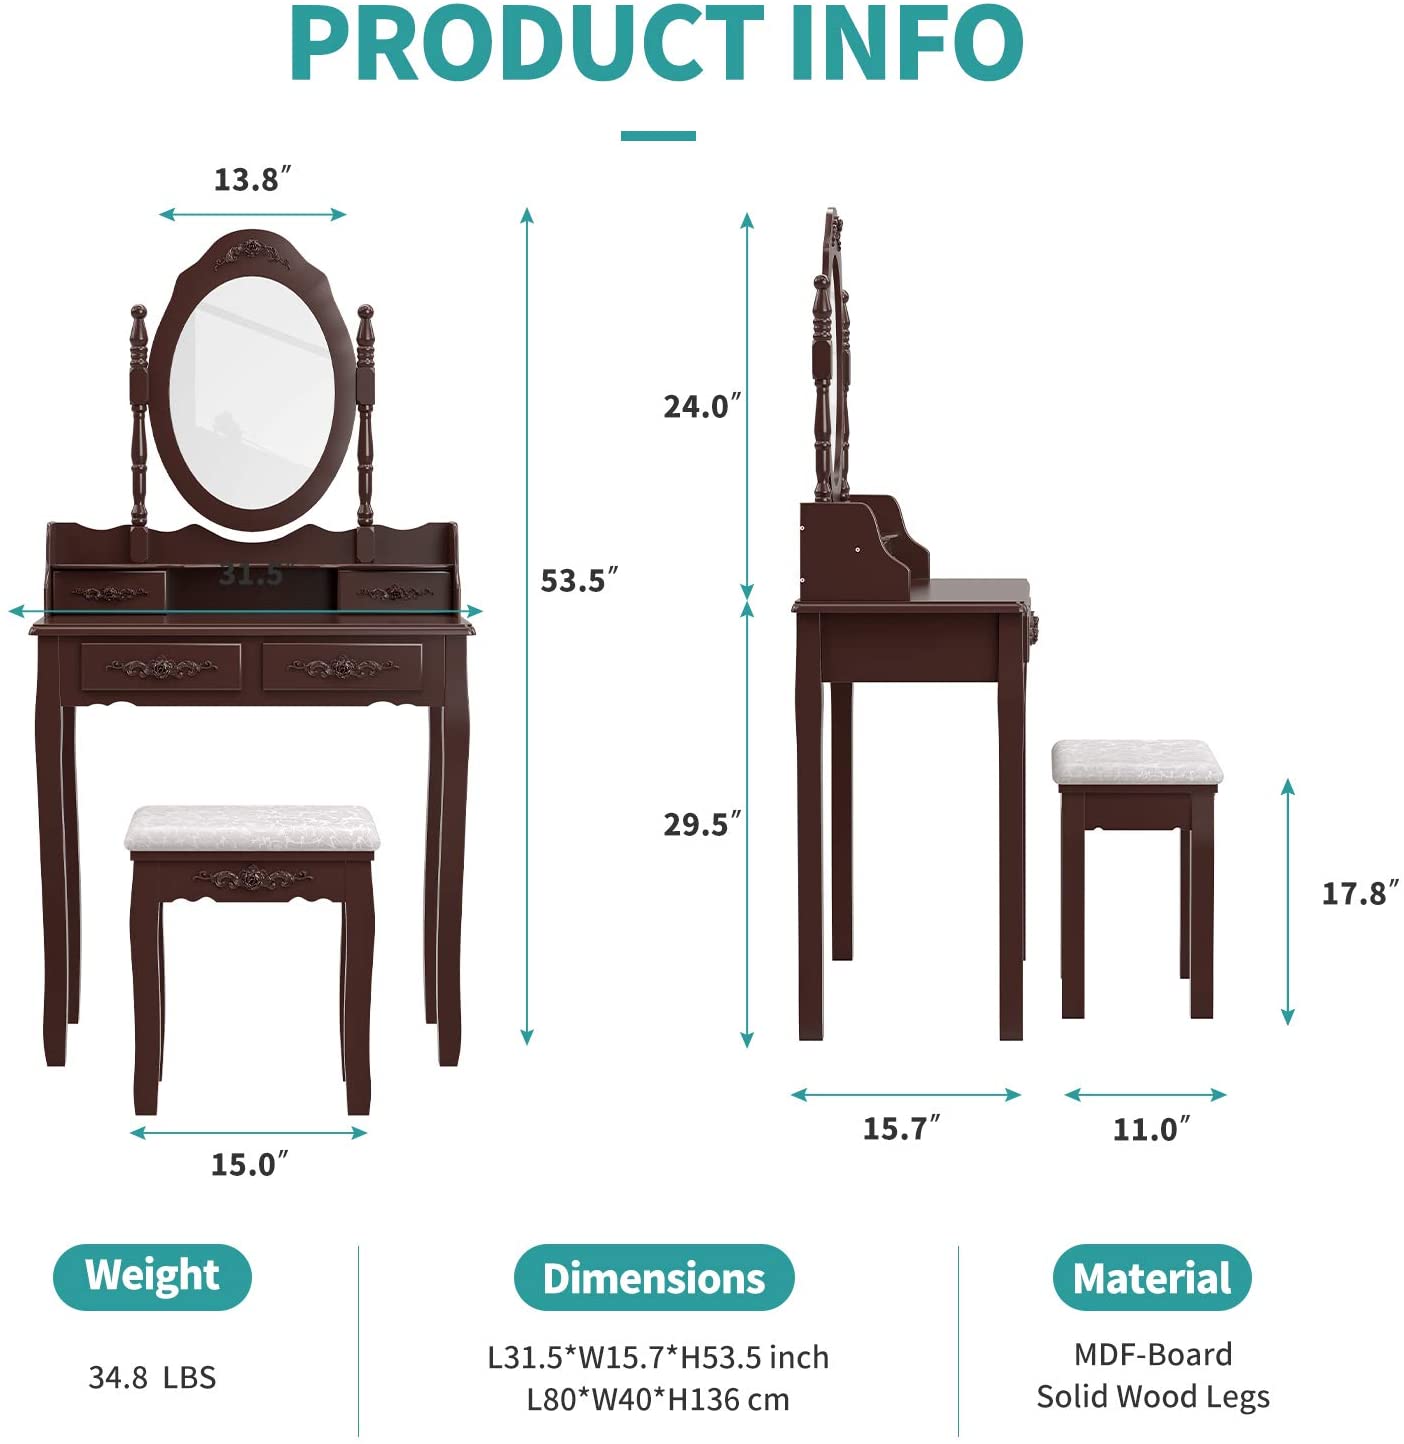 Dressing Table: Oval Mirror & Stool Black, Brown, White Dressing Table